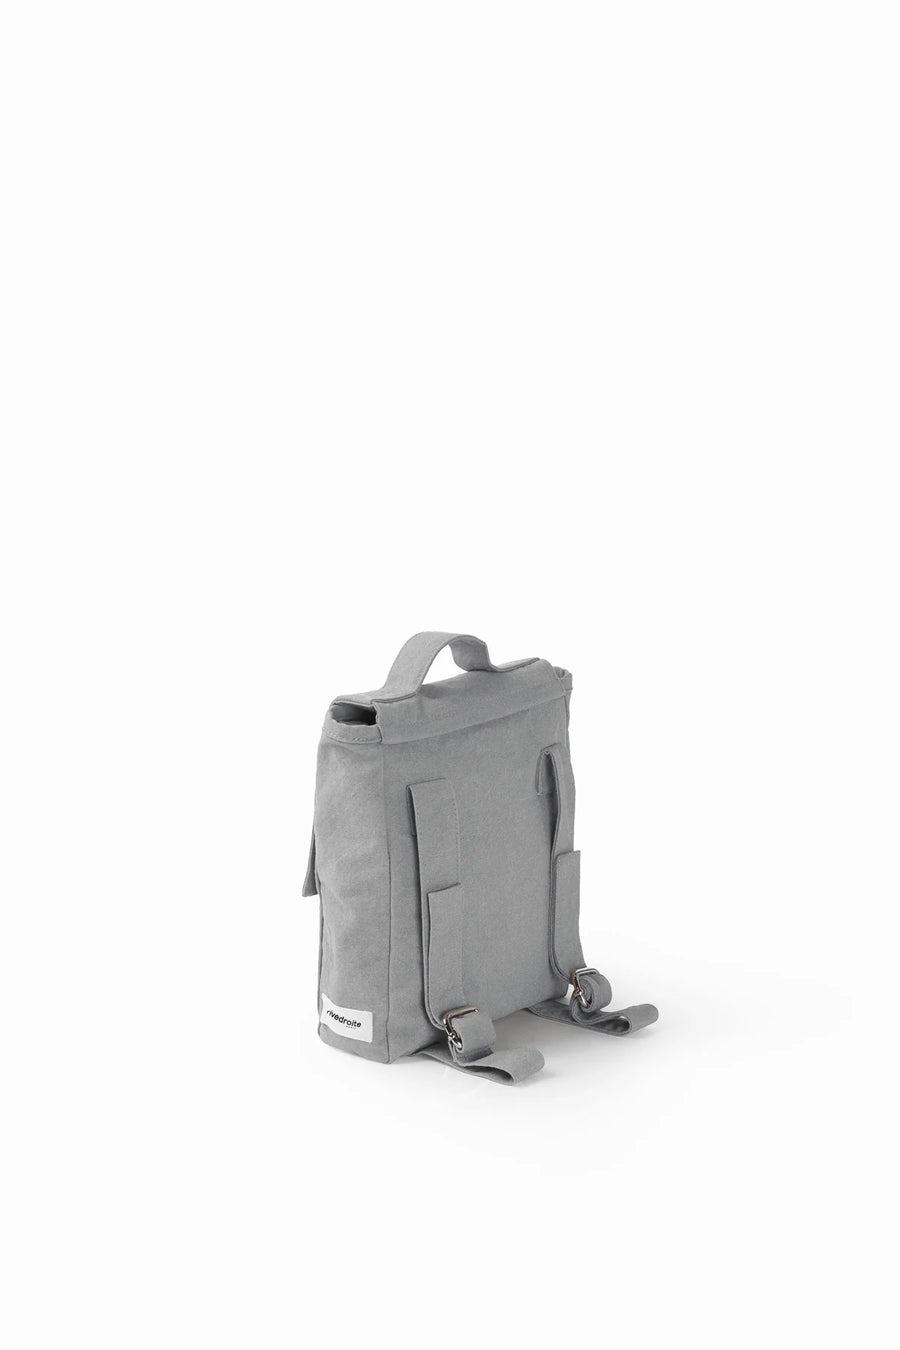 Minimes The Little One's BackPack icy grey